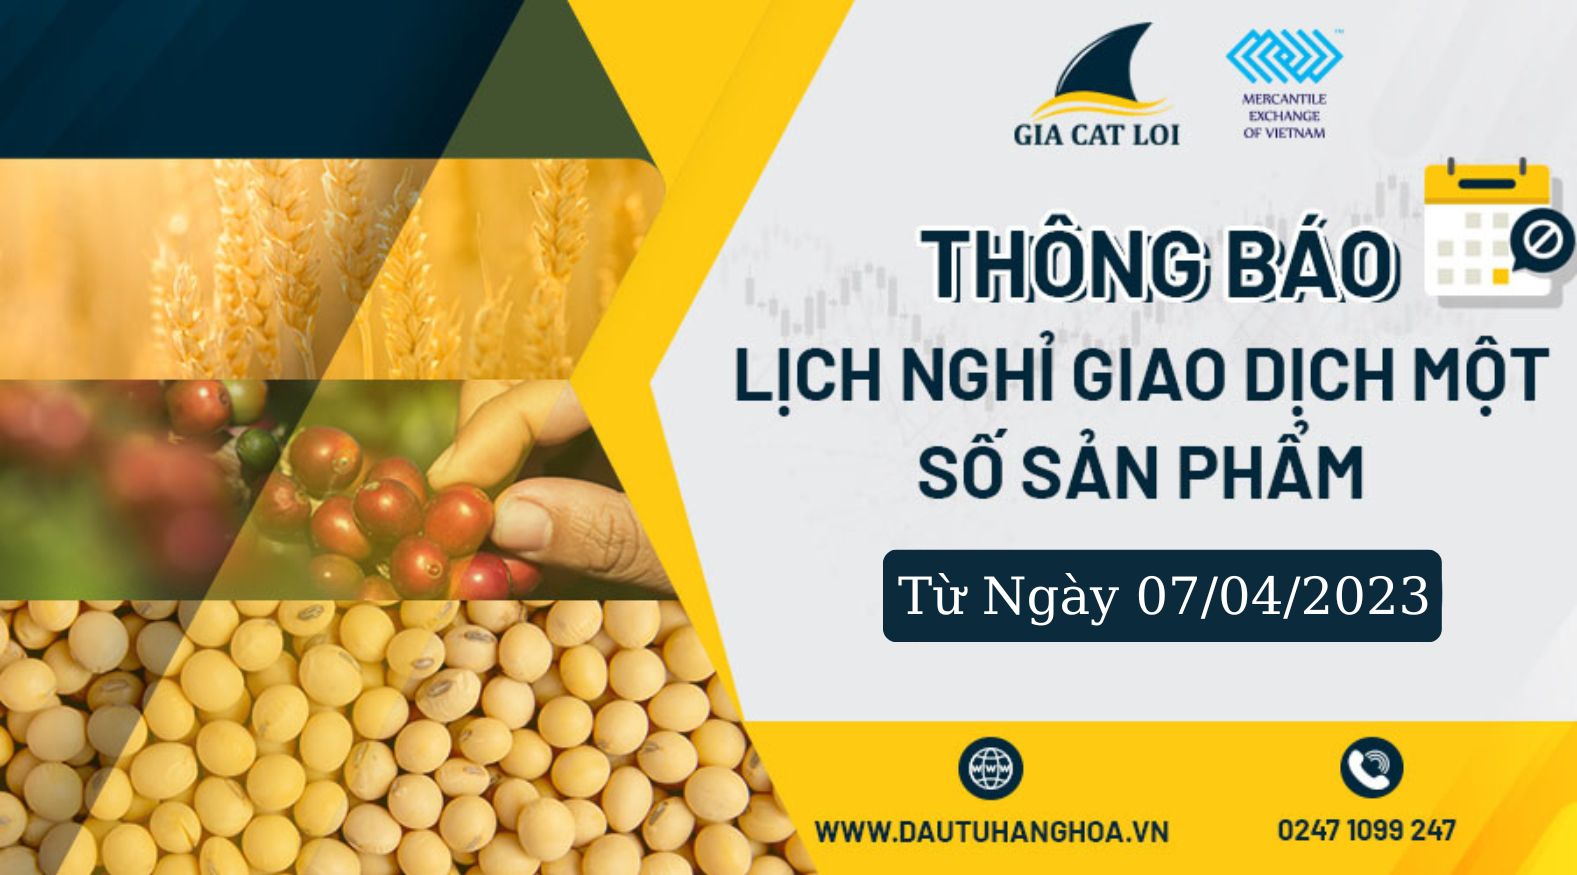 lich nghi giao dich ngay 07/04/2023